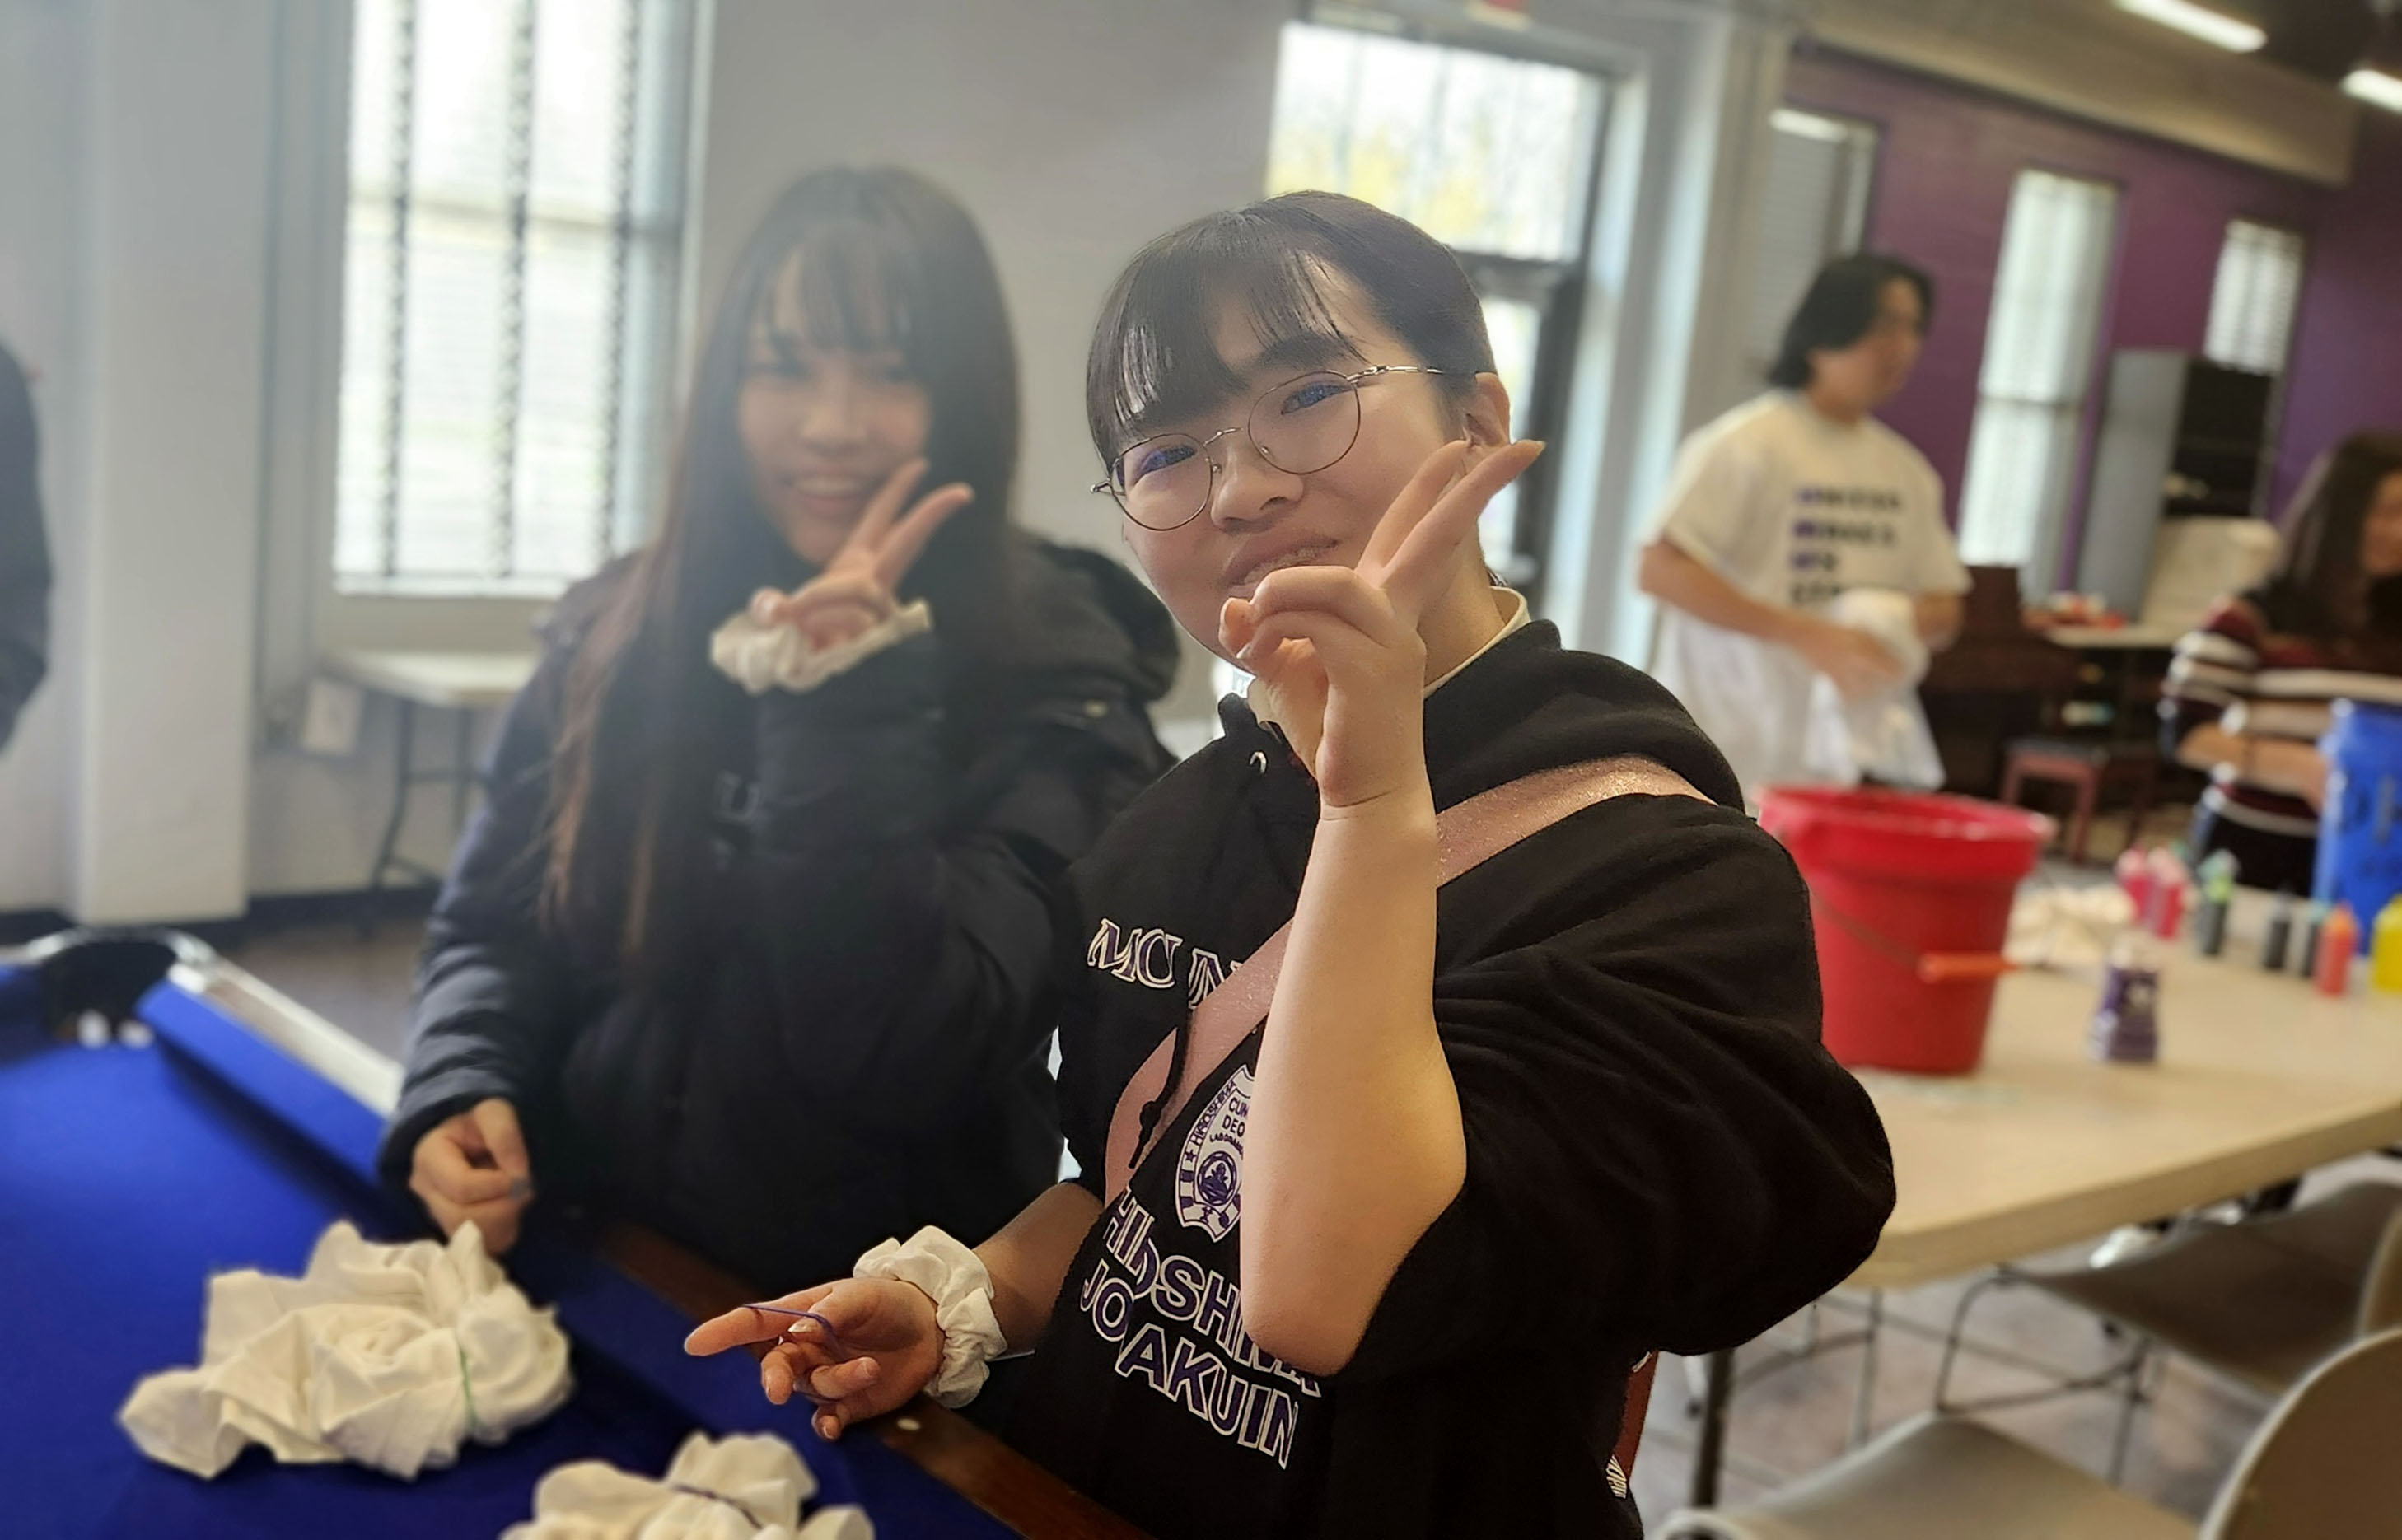 Two visiting students tie dying t-shirts